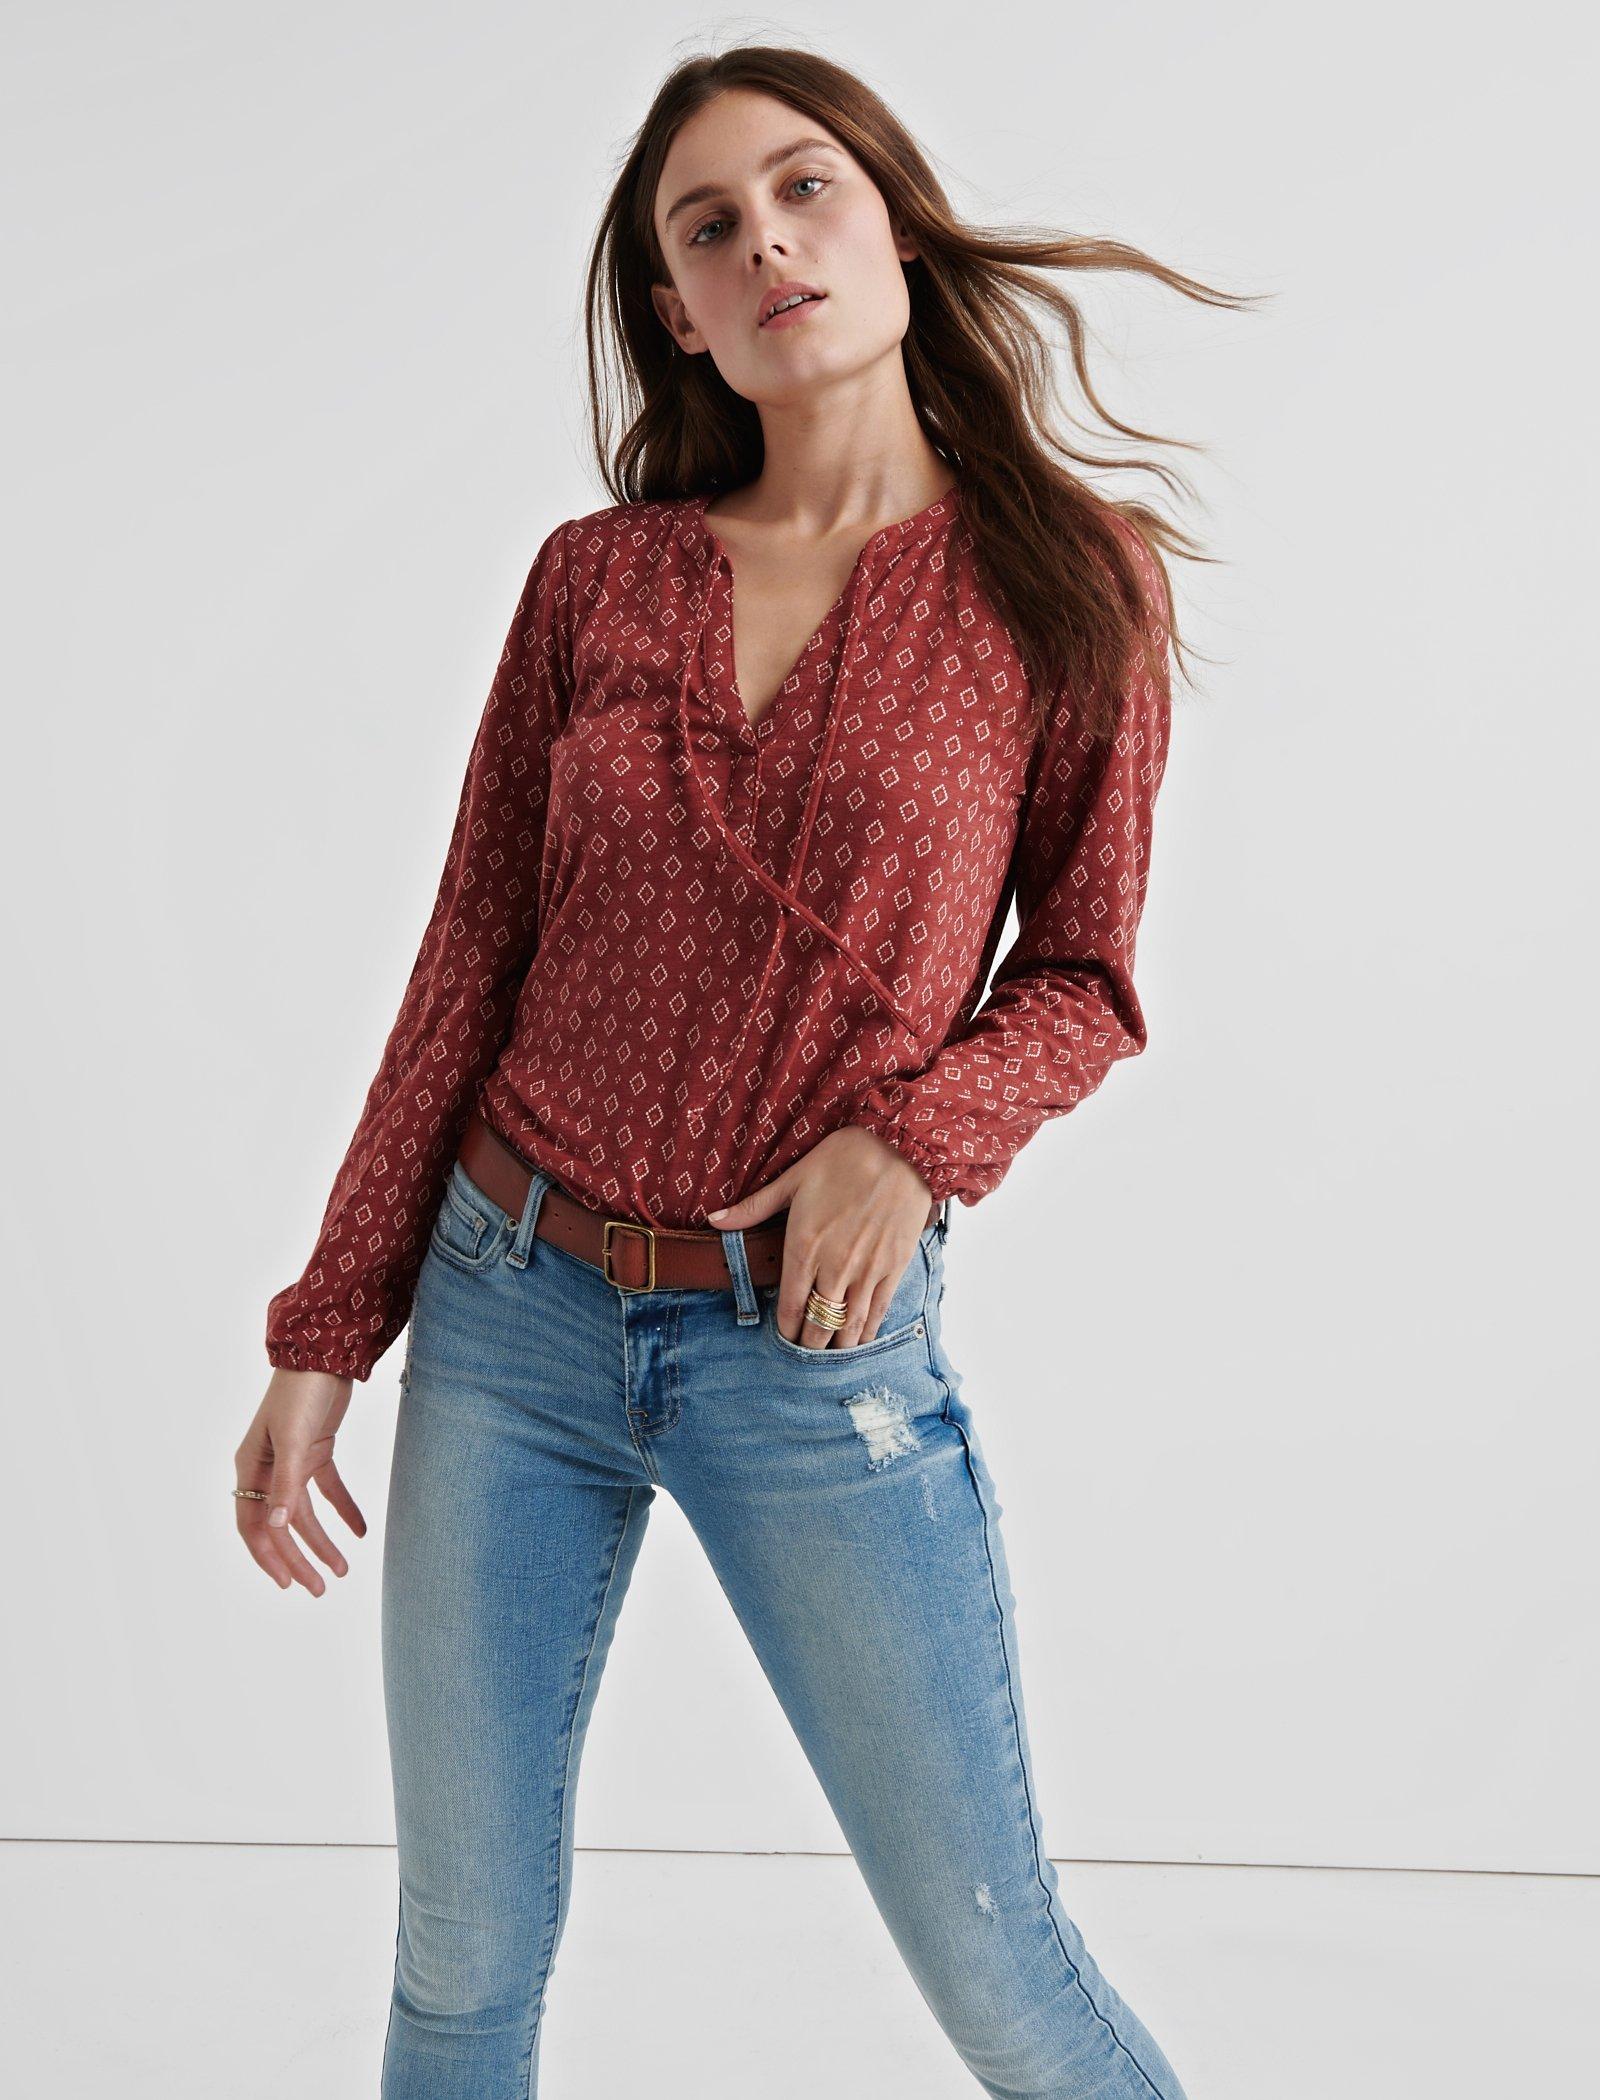 PRINTED TOP WITH TASSLES | Lucky Brand